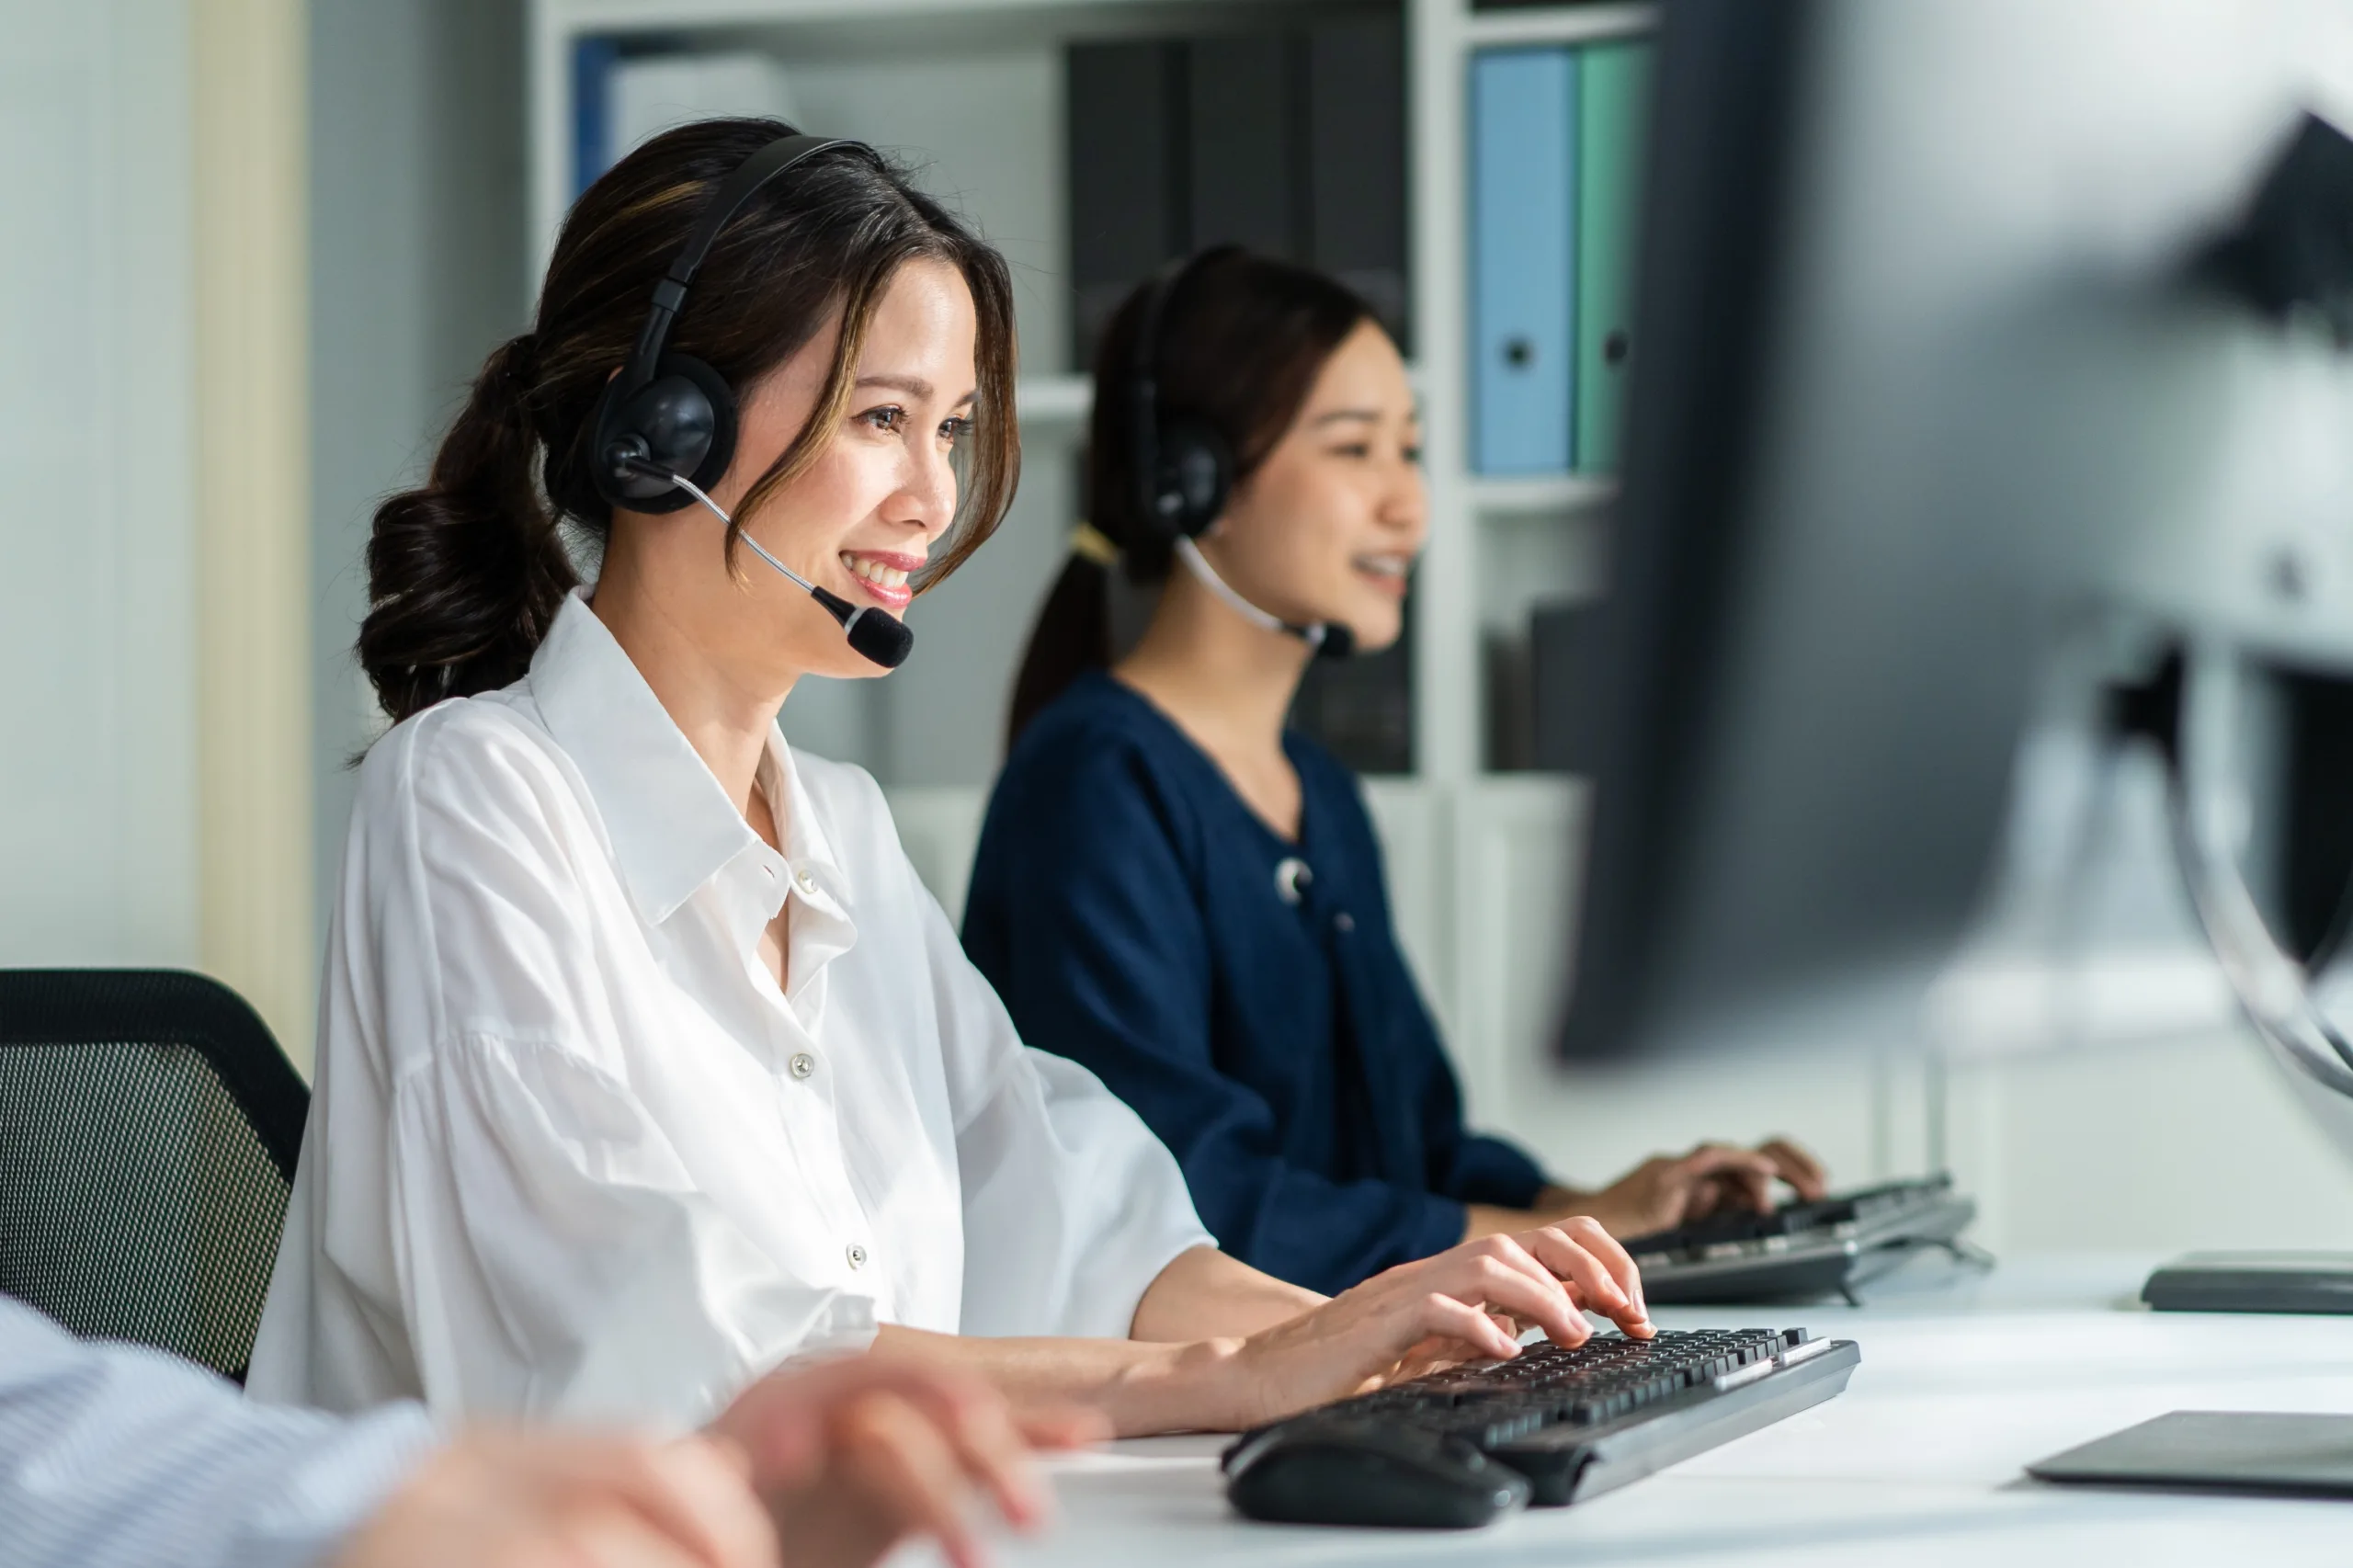 Two females answering in a call center